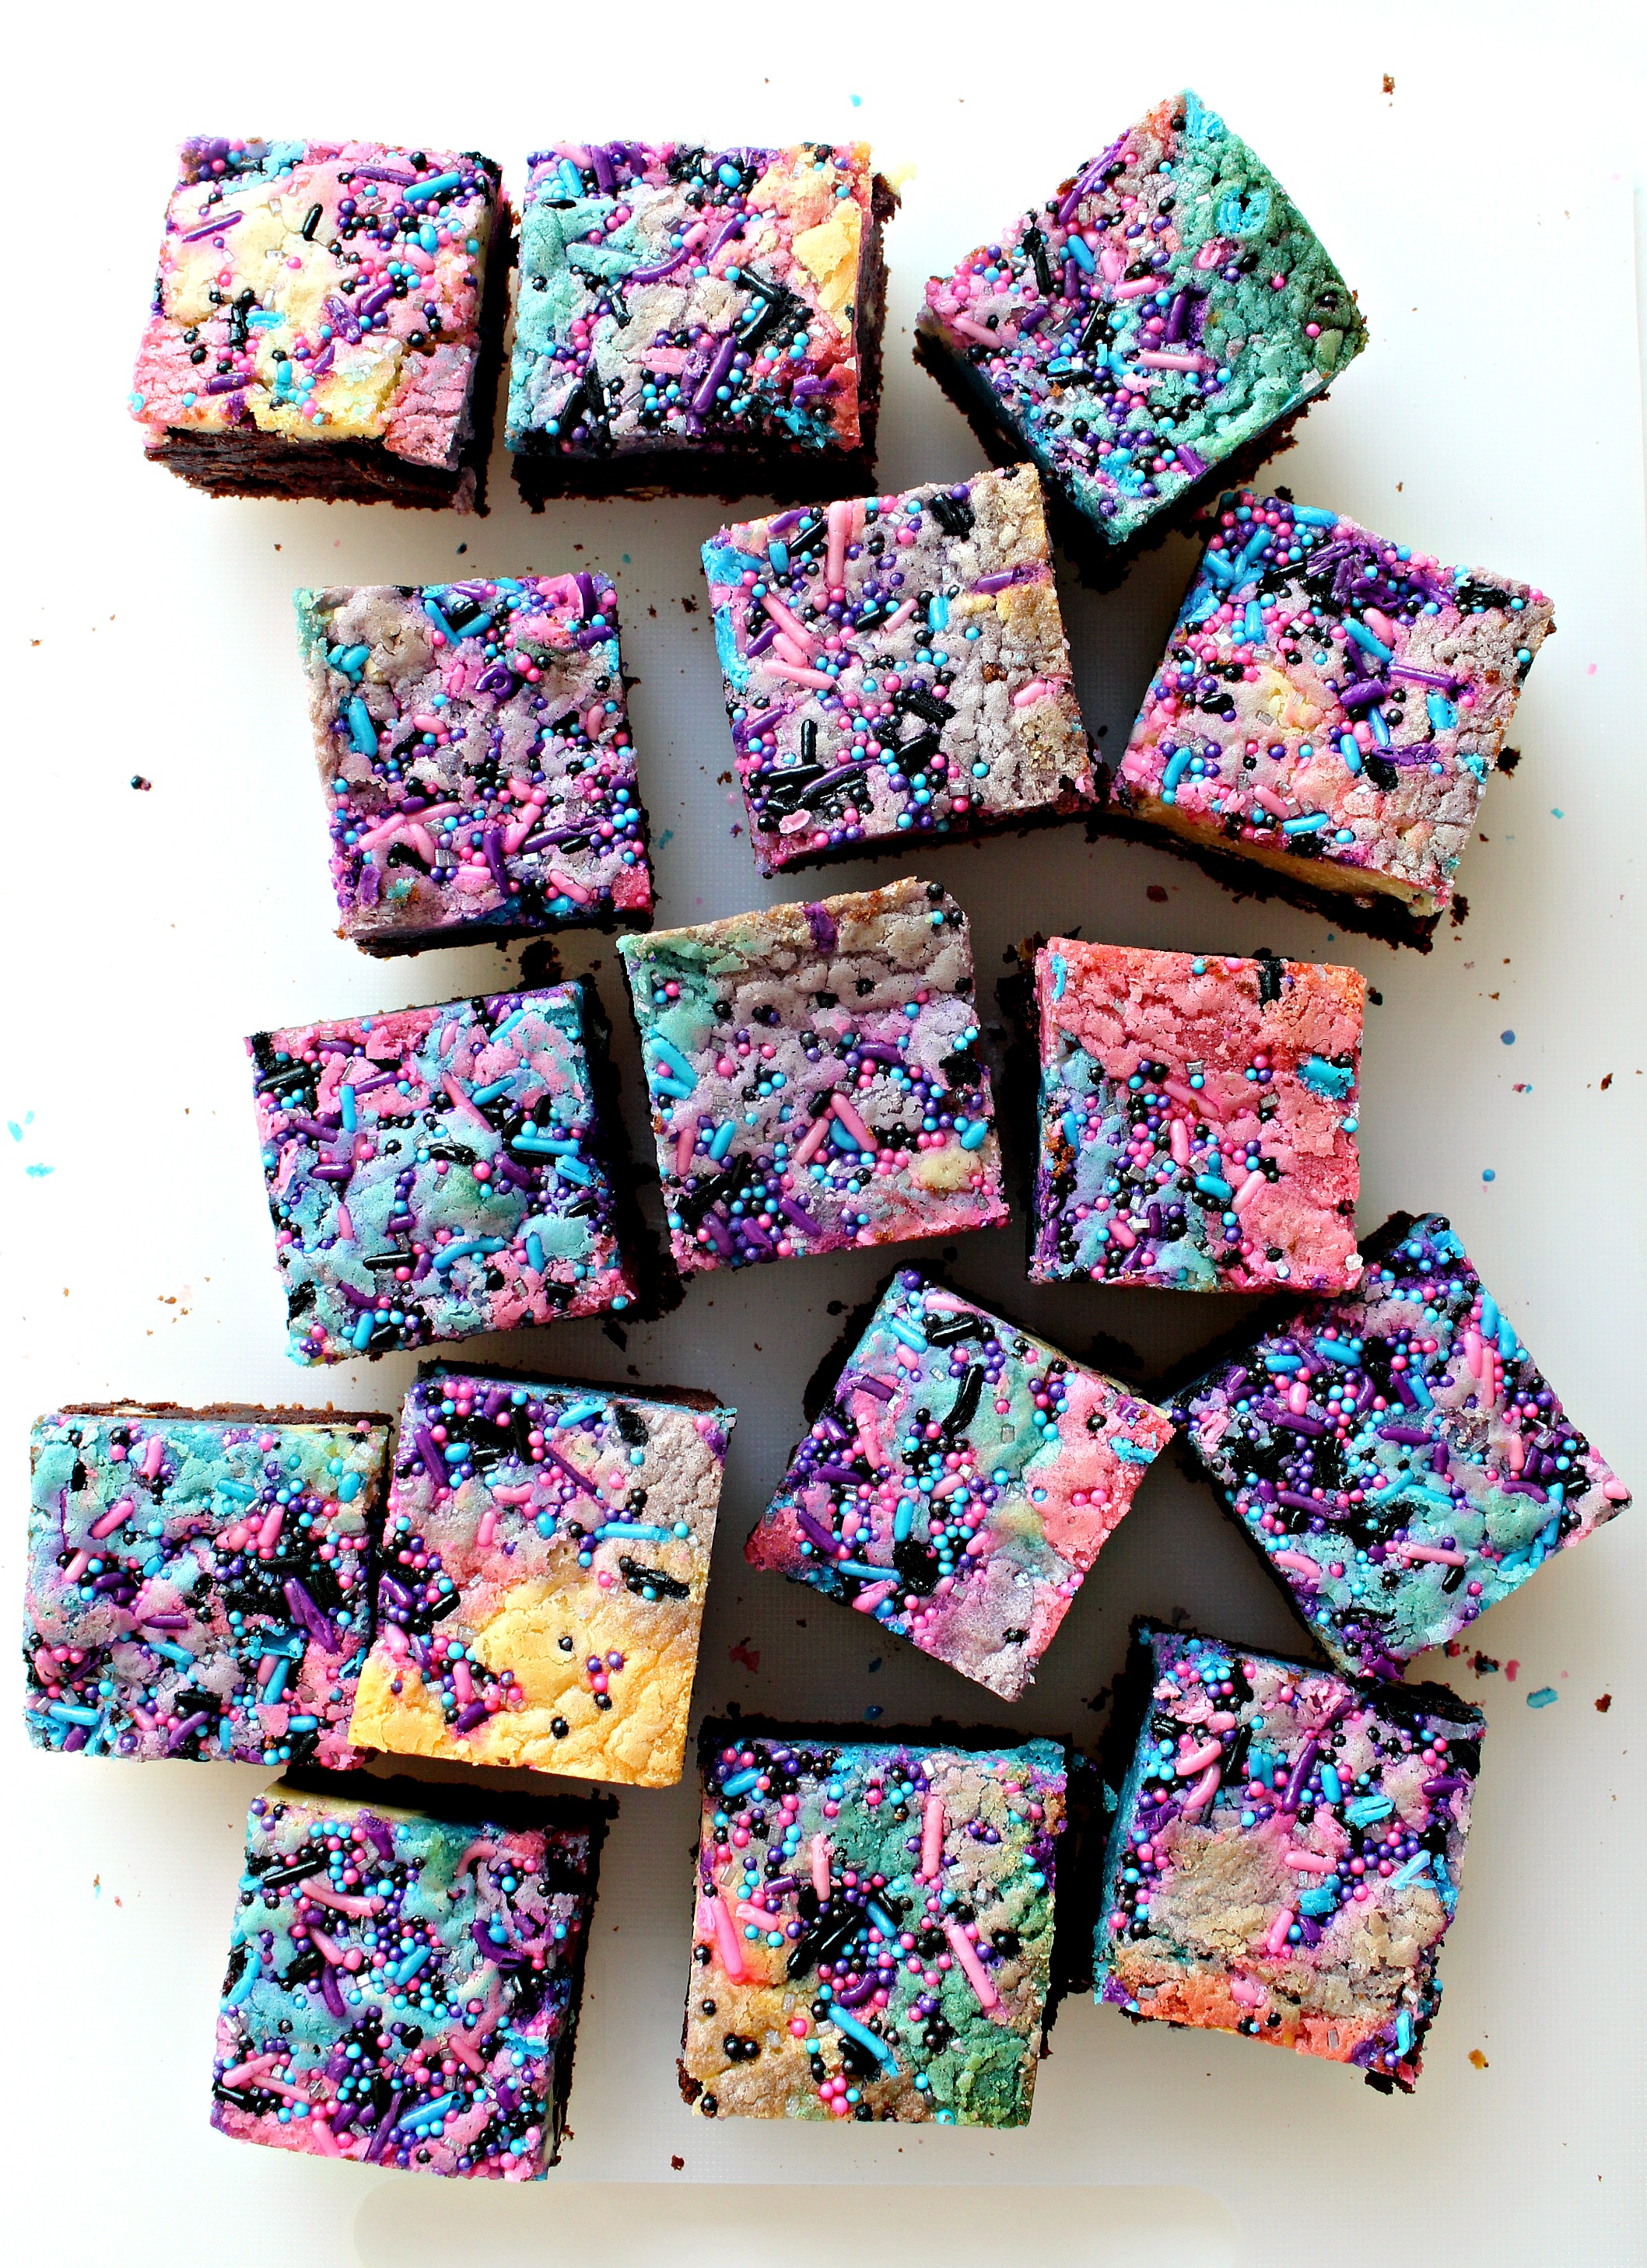 Galaxy Brownies with topped with swirls of pink, blue and purple blondie and sprinkles.